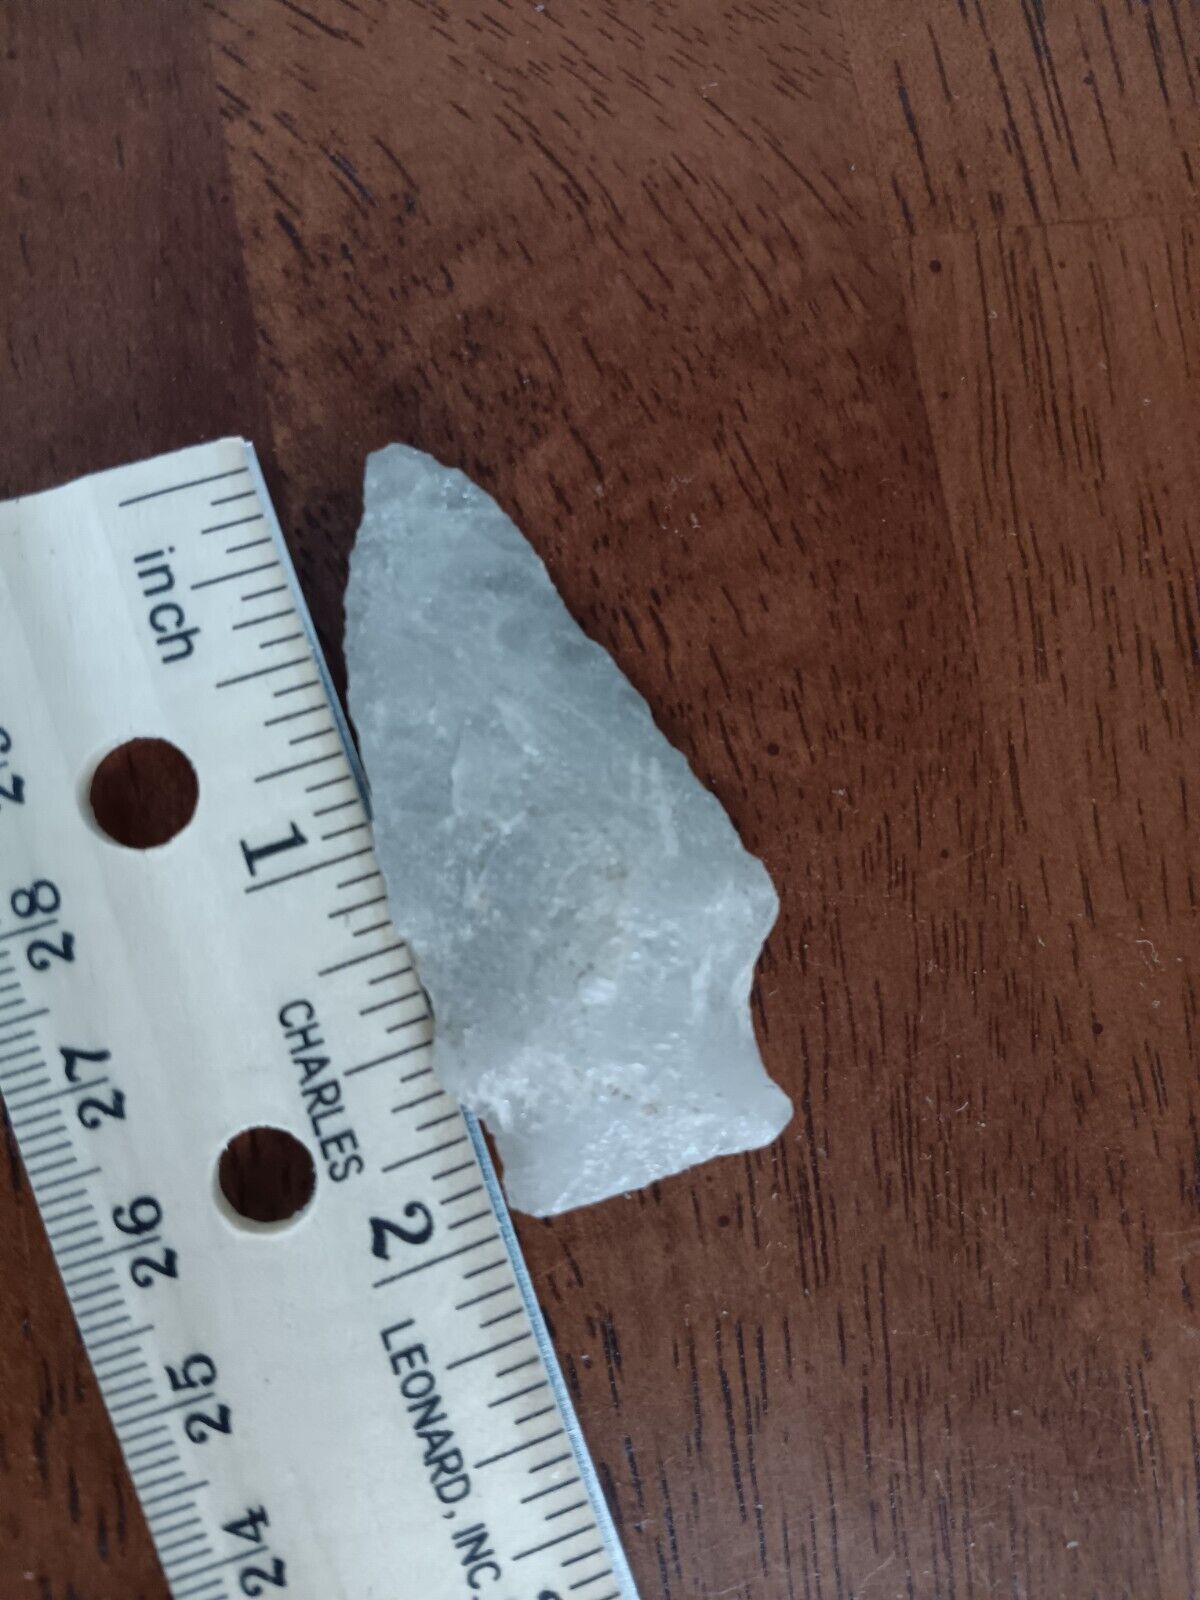 AUTHENTIC NATIVE AMERICAN INDIAN ARTIFACT FOUND, EASTERN N.C.--- ZZZ/40